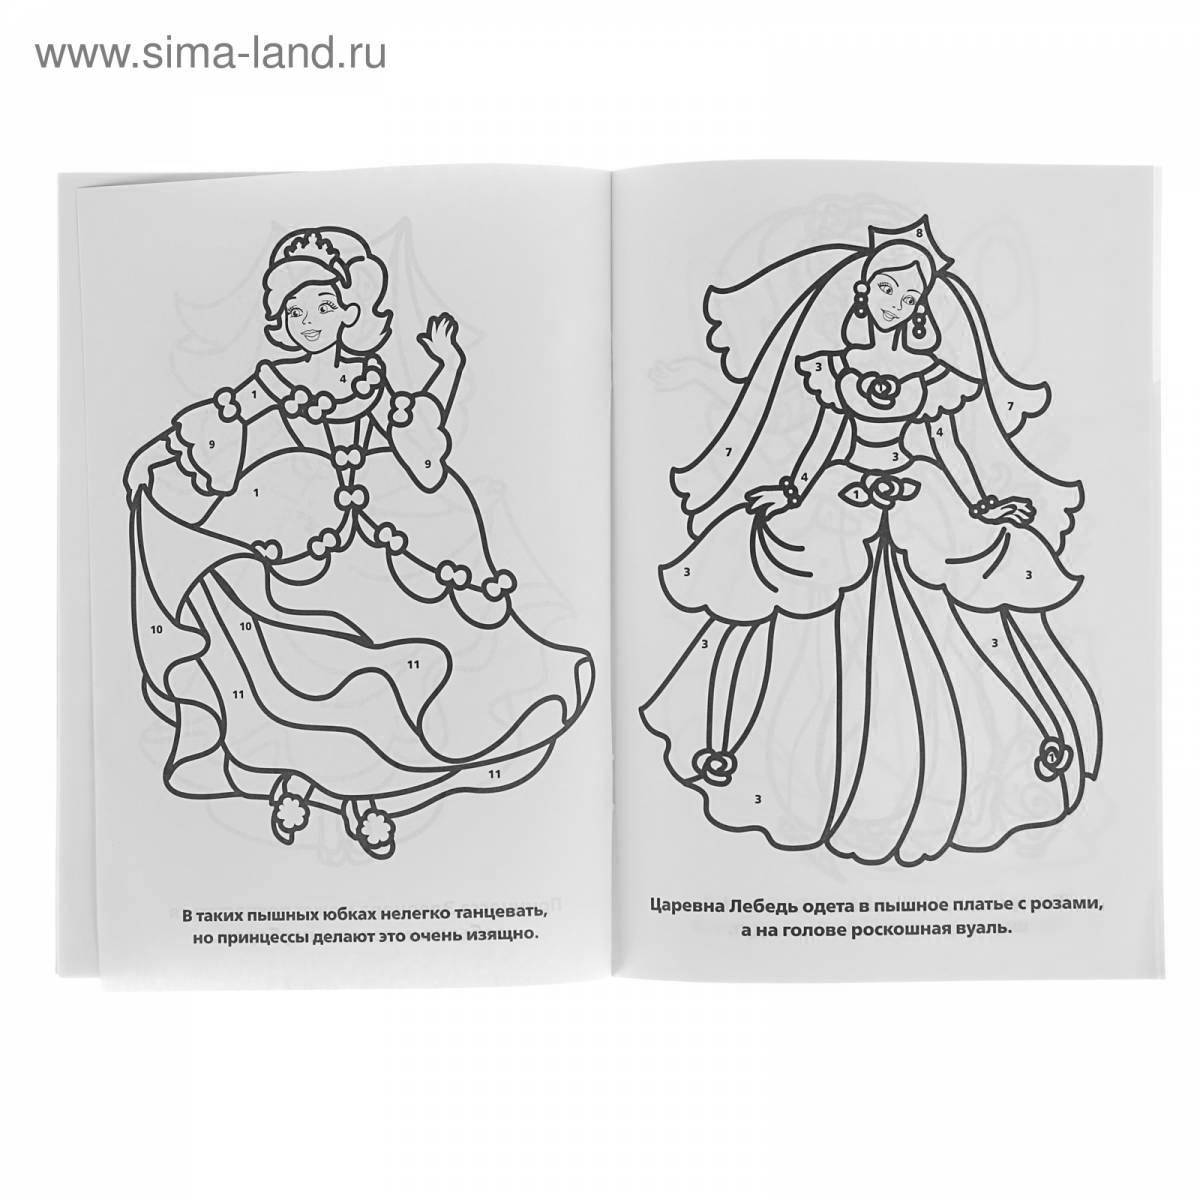 Charming princess number coloring page